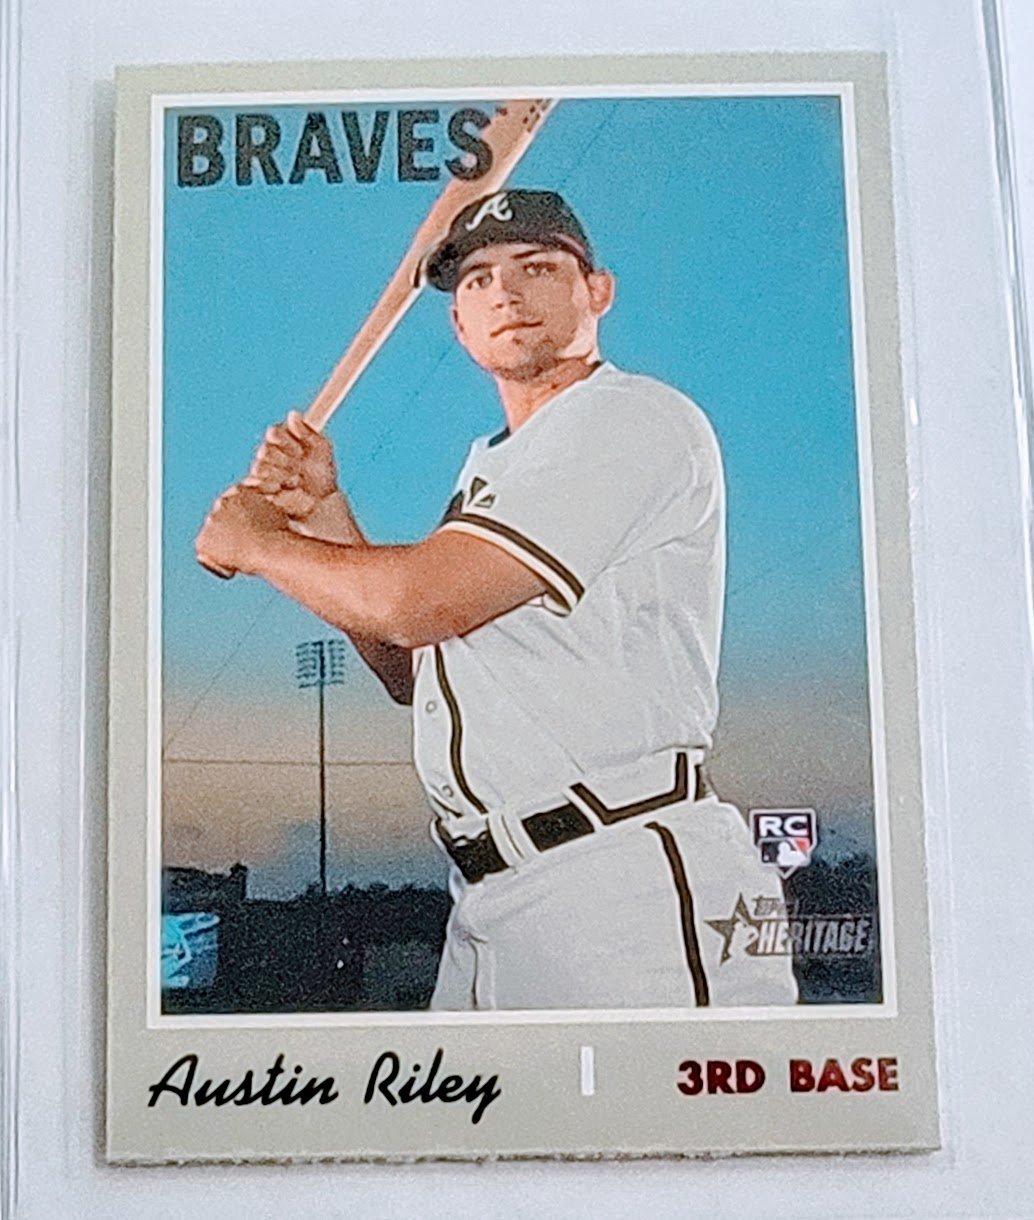 2019 Topps Heritage Austin Riley Braves Rookie Baseball Card TPTV simple Xclusive Collectibles   